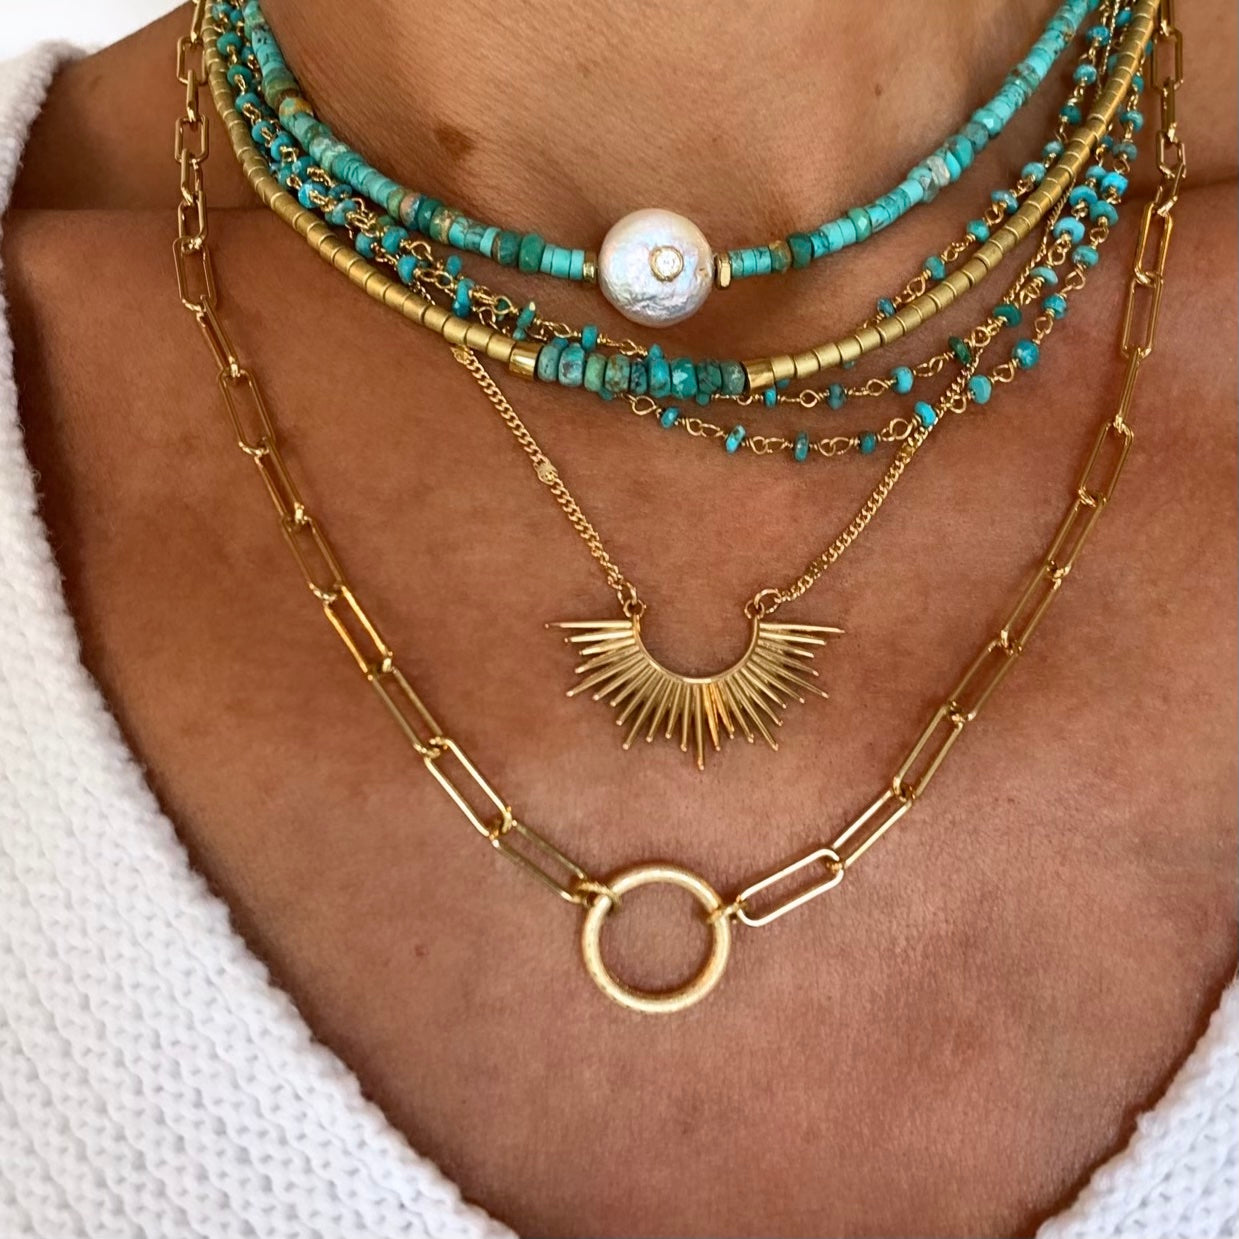 Matte Gold // Turquoise Necklace